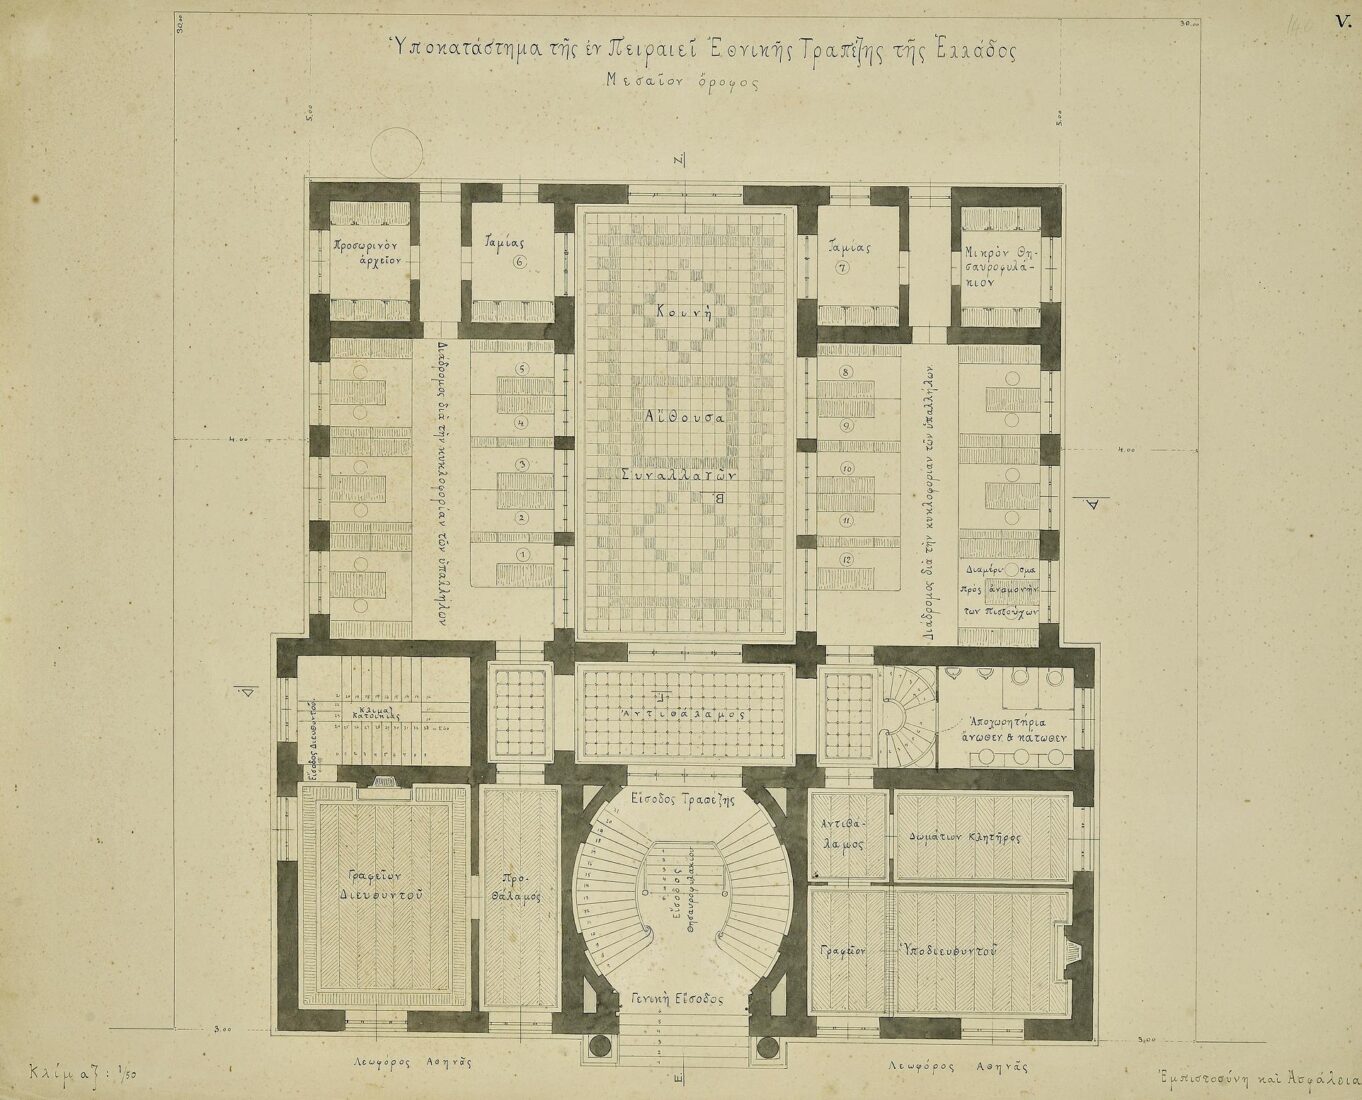 Branch of the National Bank of Greece, Piraeus, Iroon Polytehniou Street [former Athinas Street], Plan of the Middle Floor - Ziller Ernst